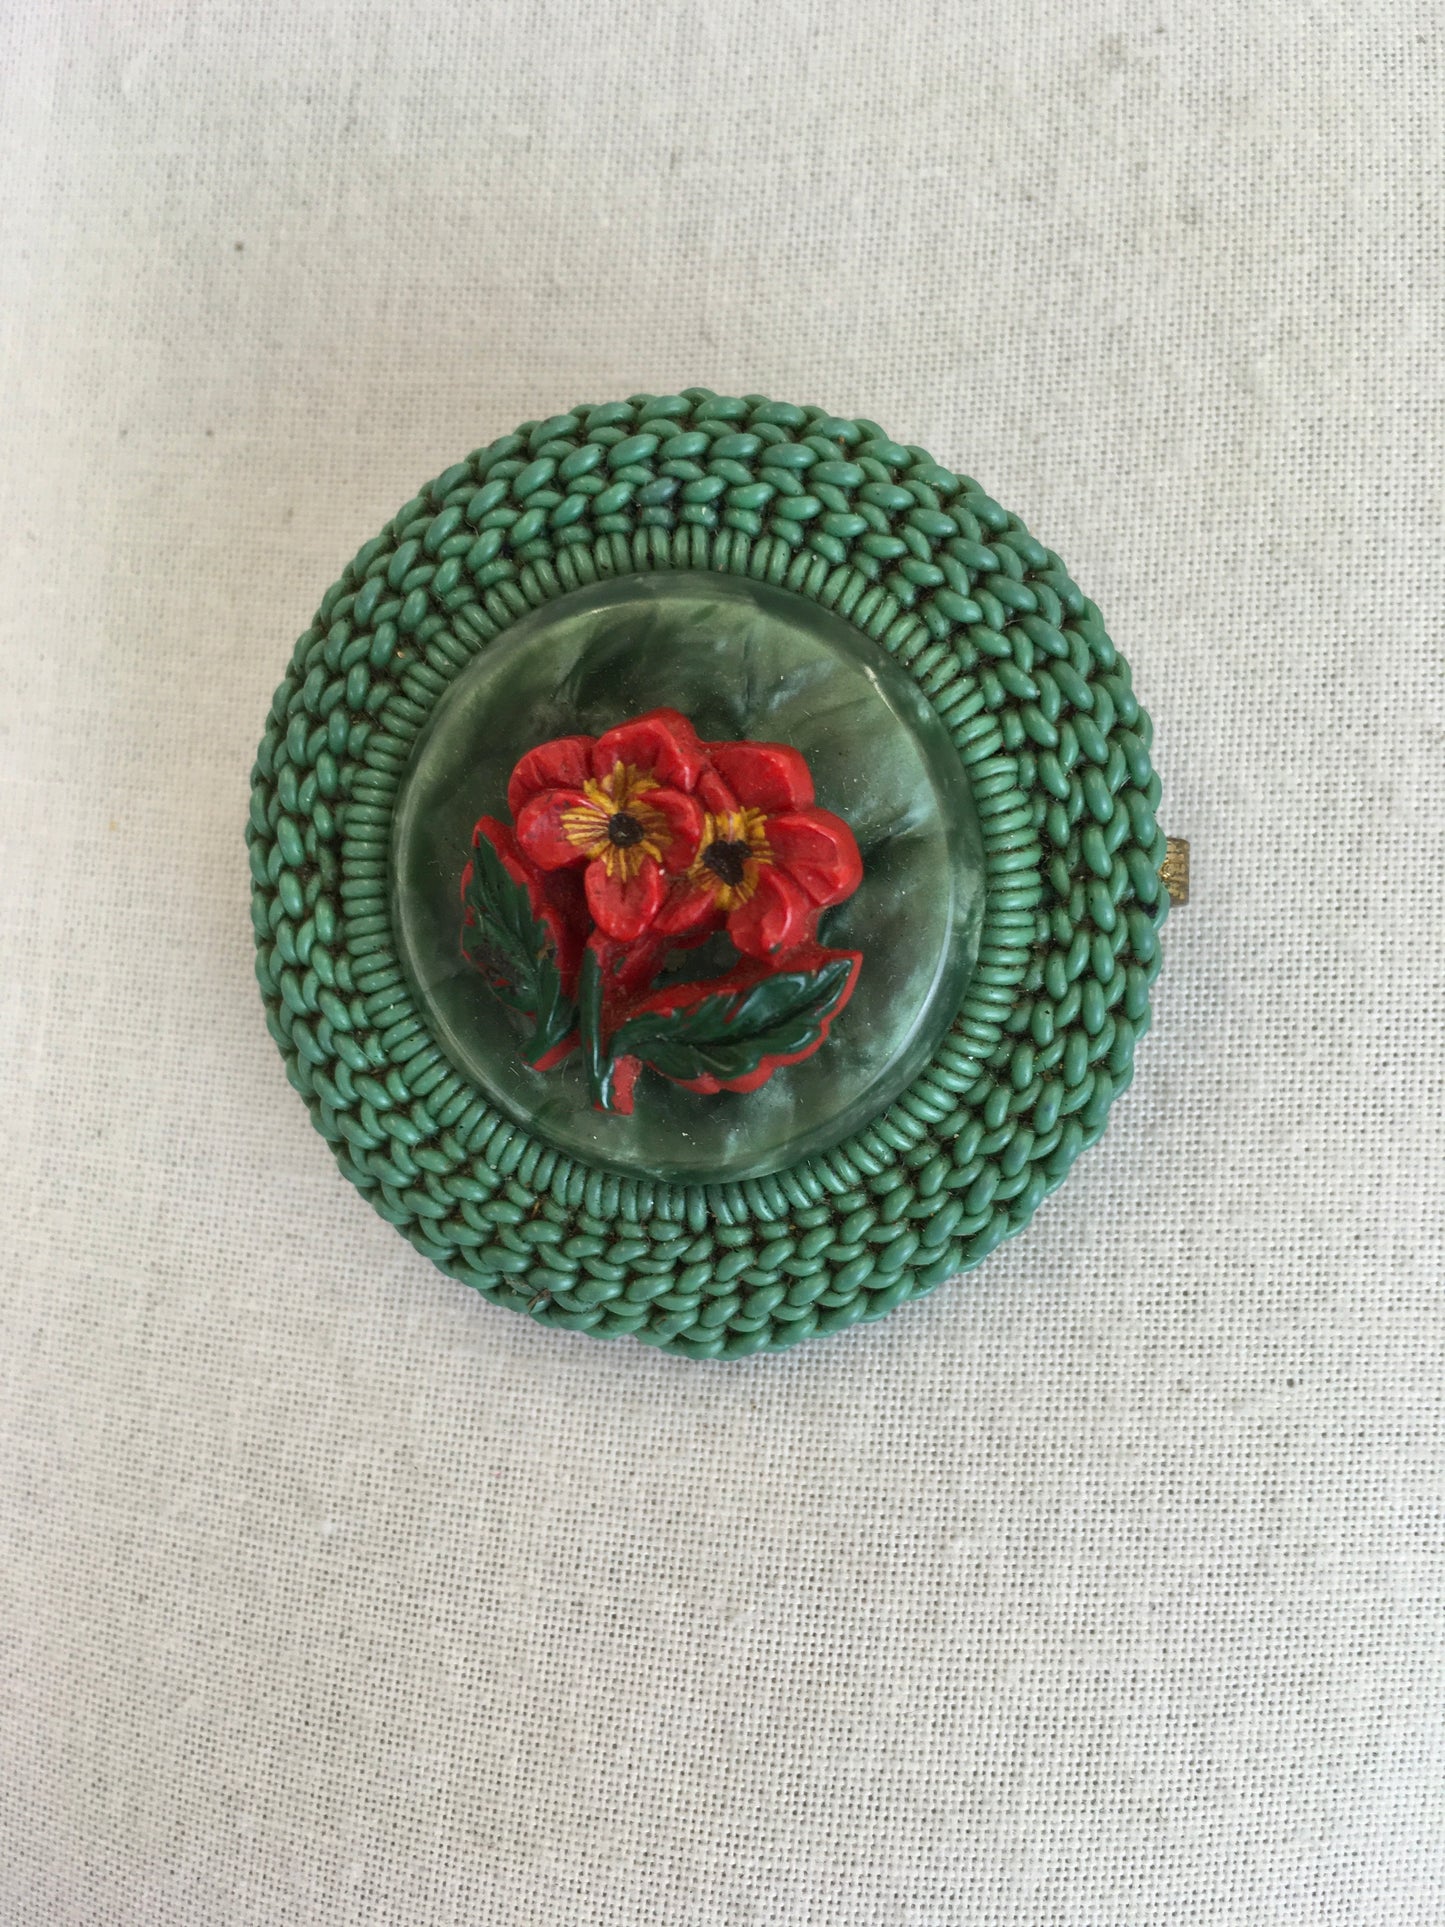 Original 1940’s Make Do and Mend Telephone Wire Brooch - In A Festive Red and Green Colour Pallet